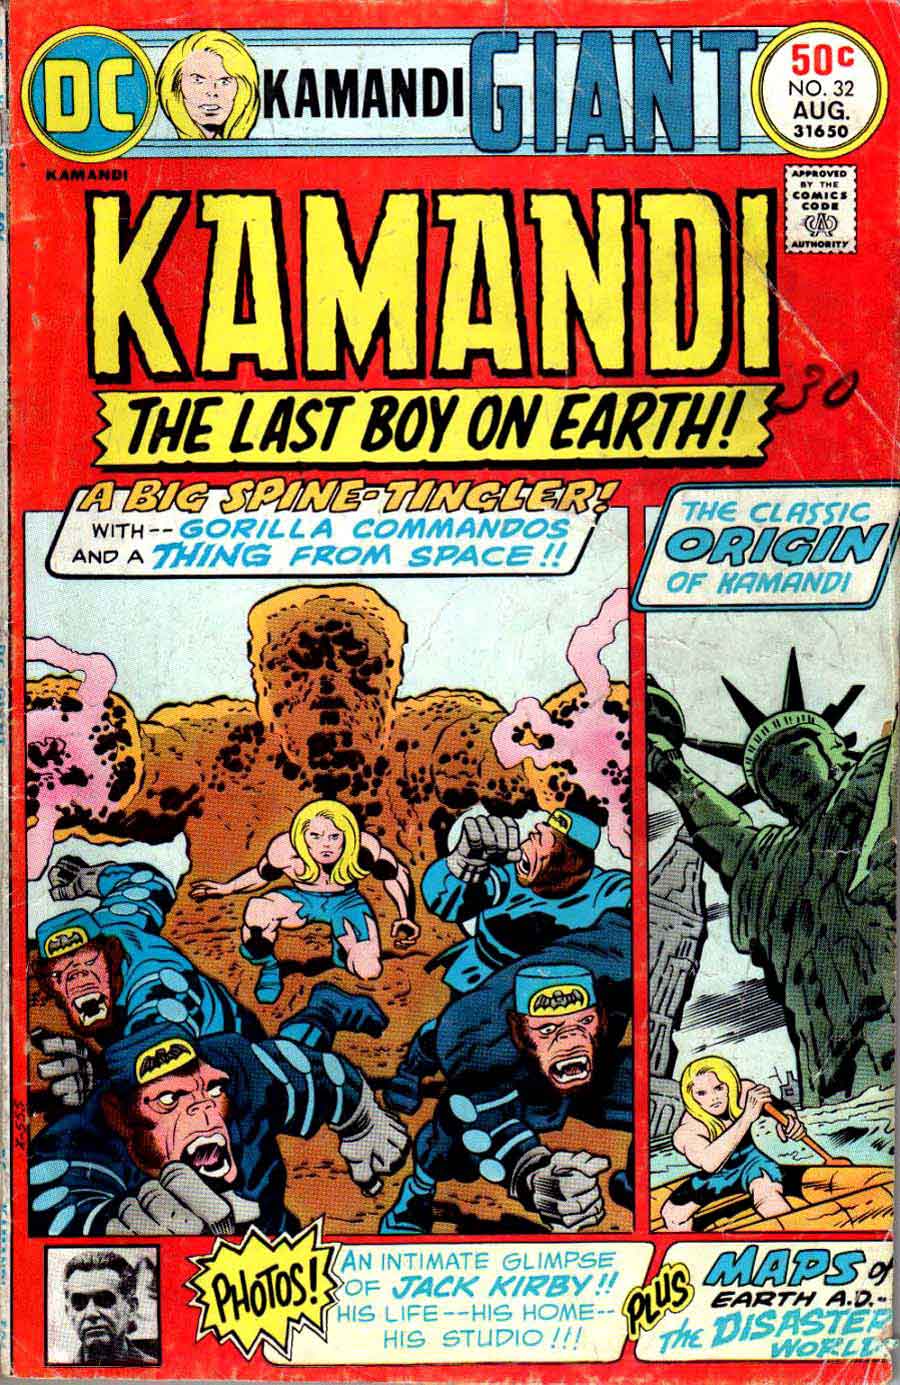 Kamandi #32 dc bronze age science fiction 1970s comic book cover art by Jack Kirby